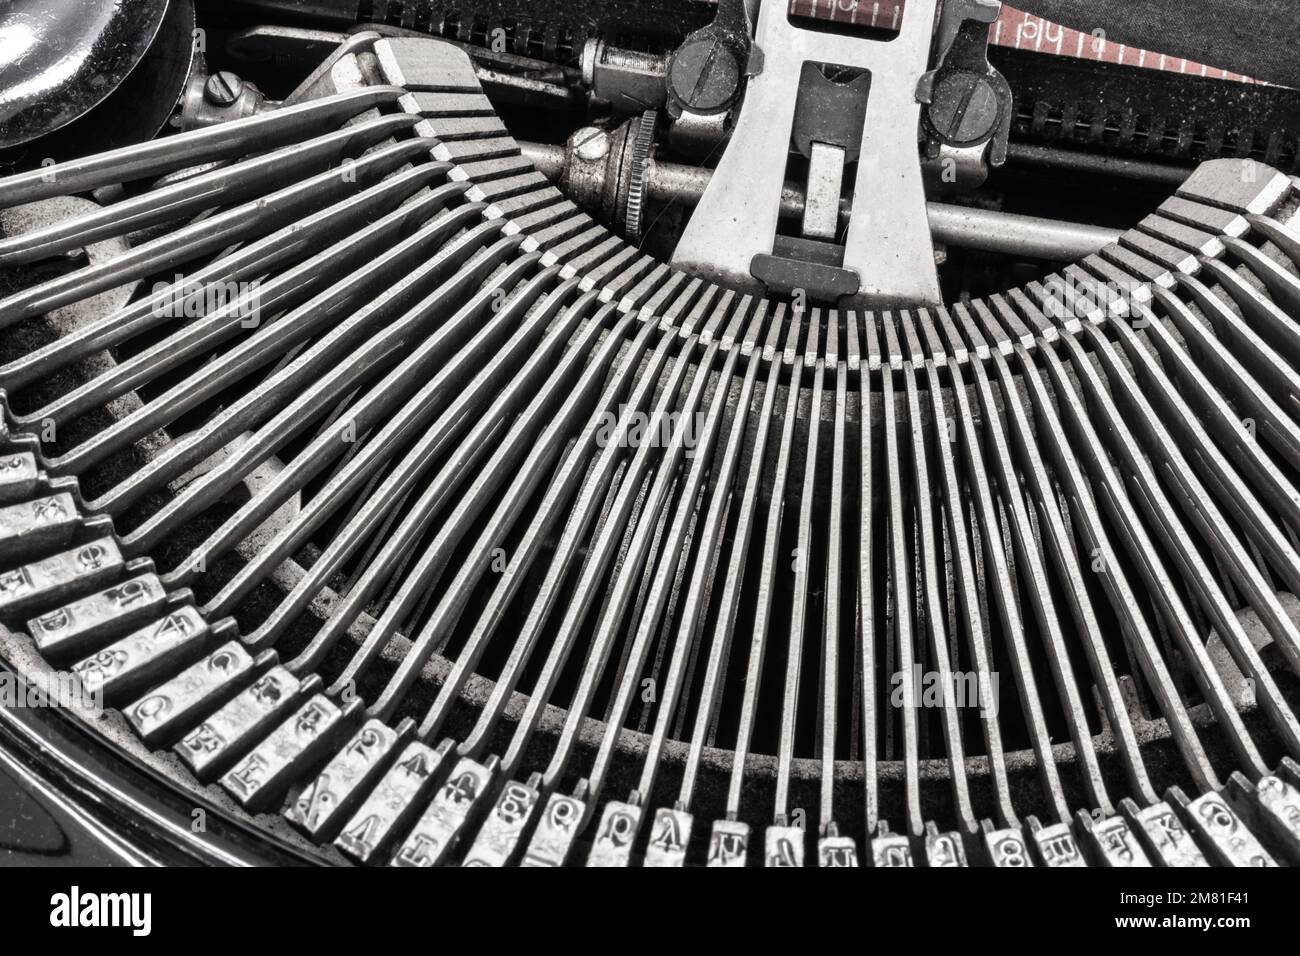 Antique Typewriter with traditional typebars. Before text messaging, people used typewriters to communicate by writing letters. Stock Photo